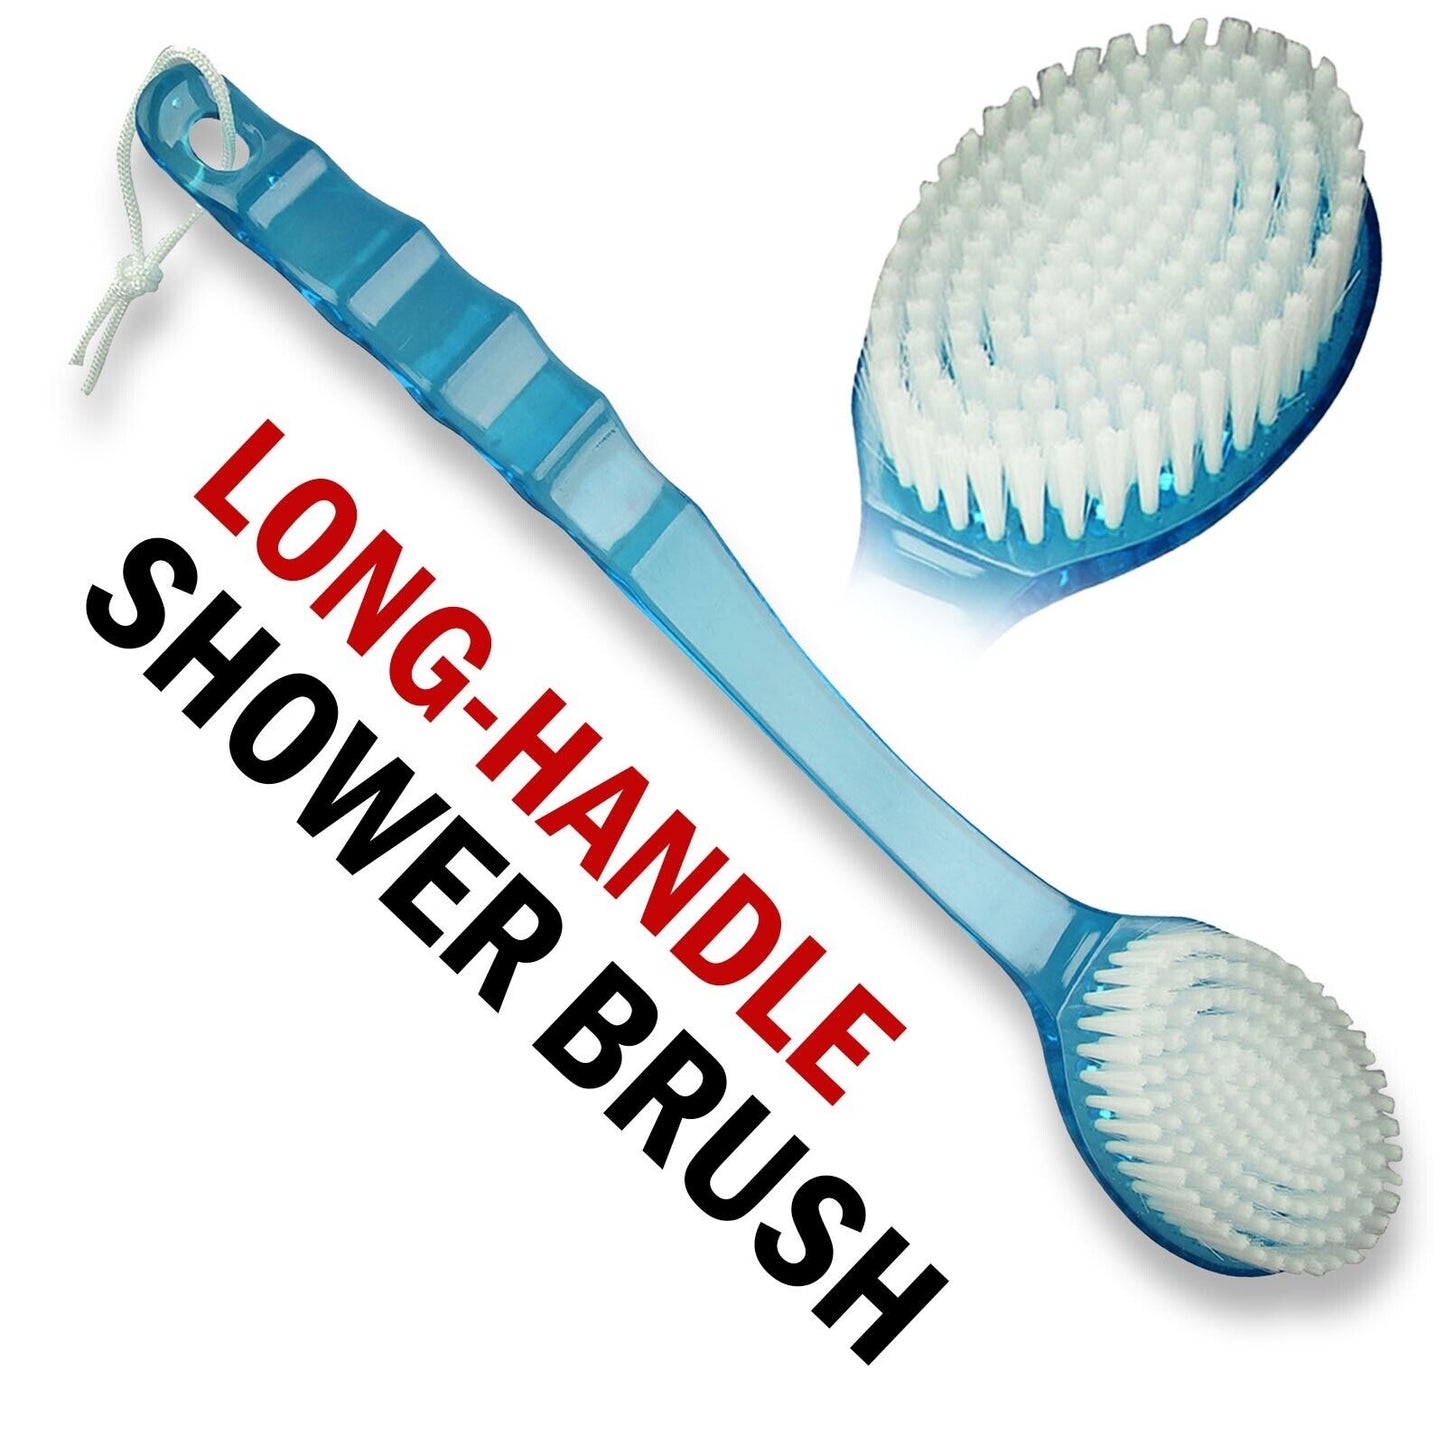 Long Handle Bath Body Brush: Soft, Exfoliating Skin Scrubber Massager for Showering and Back Scrubbing.